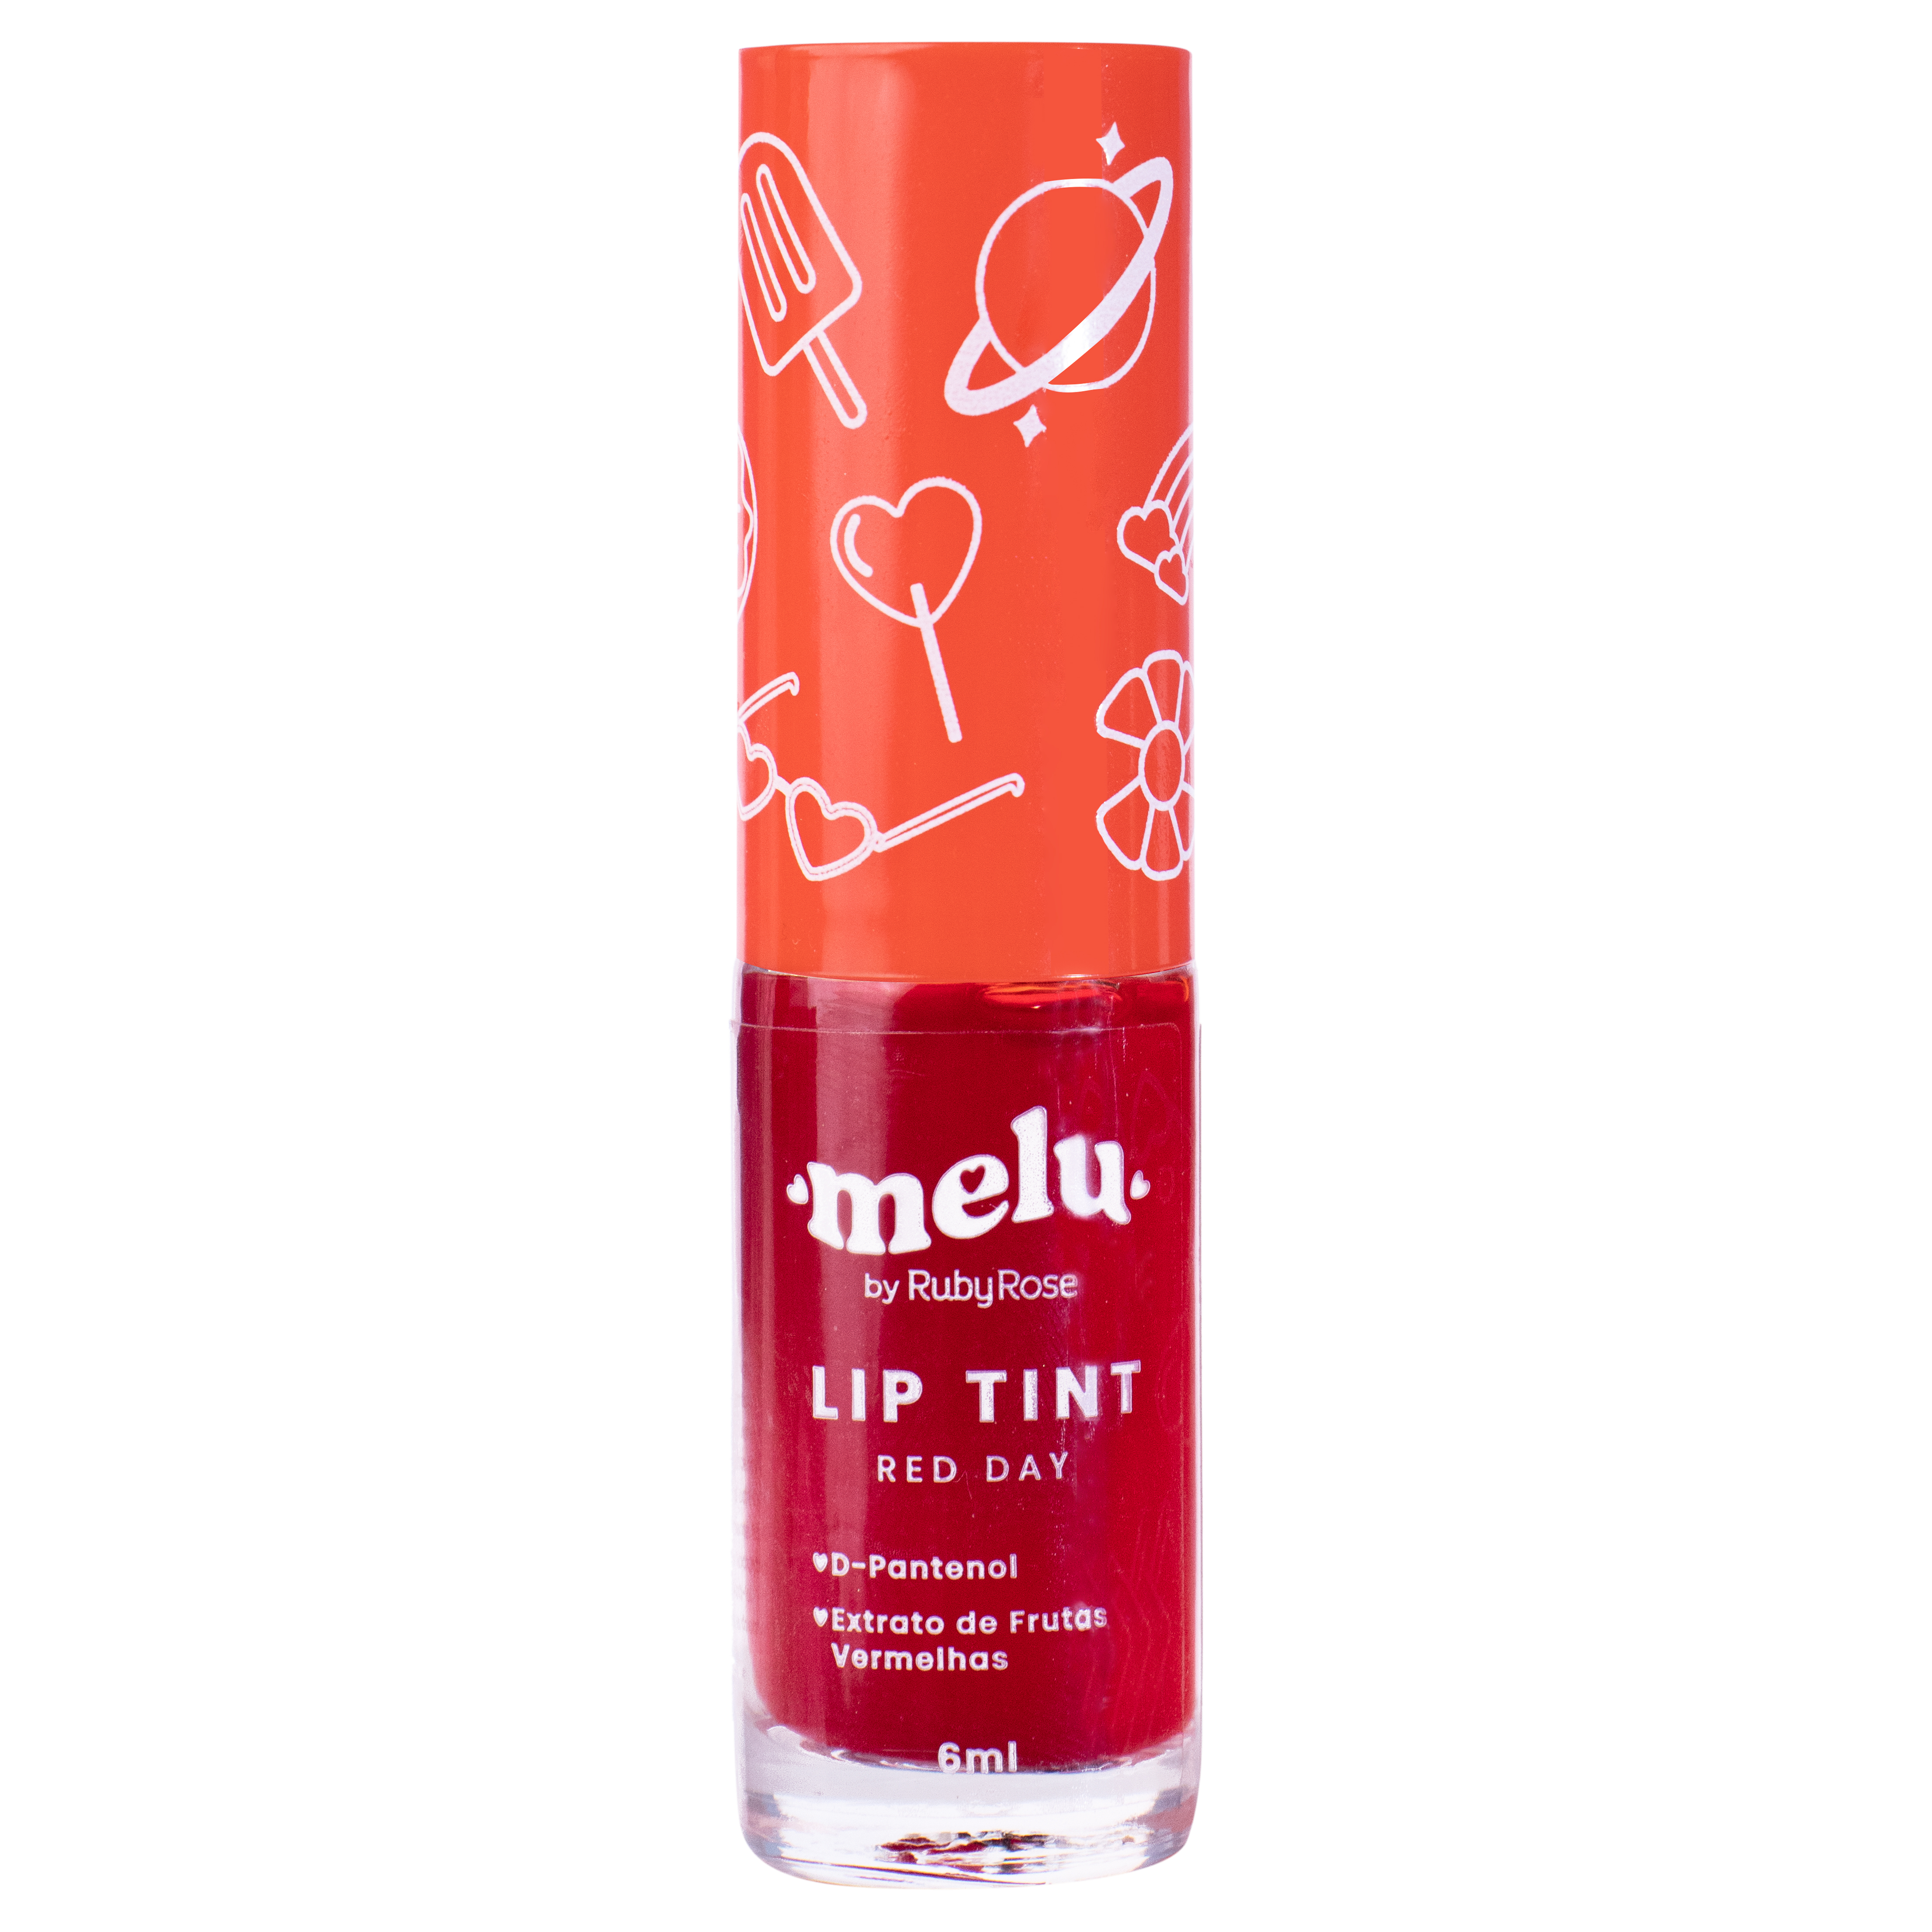 7898671428772 - RUBY ROSE LIP TINT RED DAY RR75013 MELU